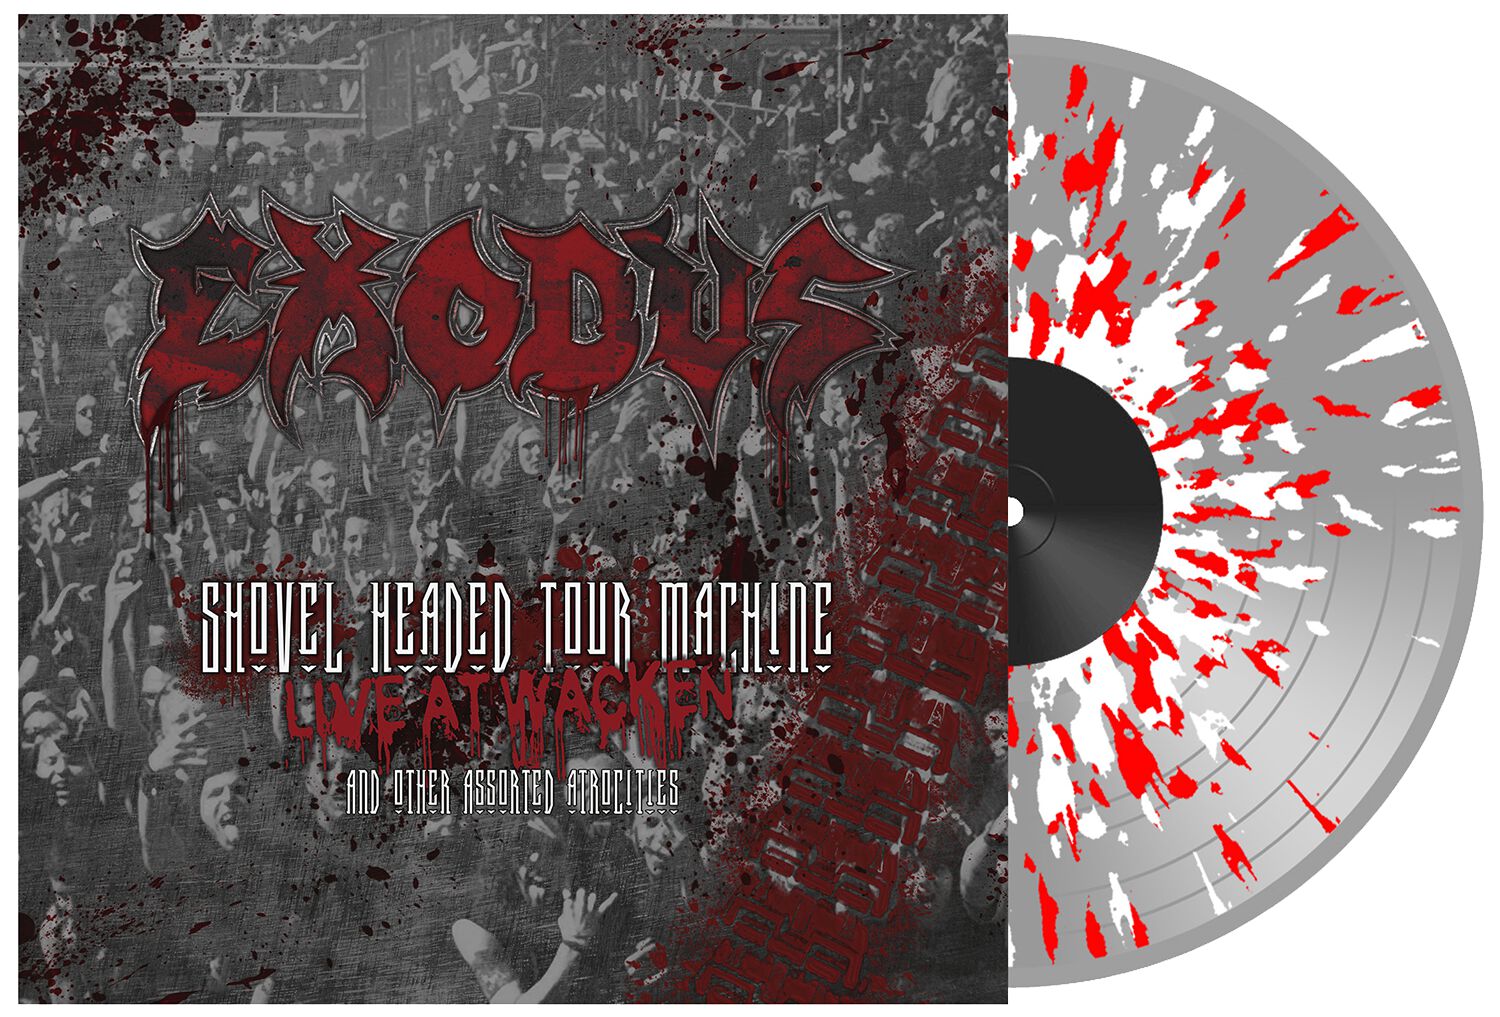 Image of Exodus Shovel headed tour machine - Live at Wacken and other assorted atrocities 2-LP splattered